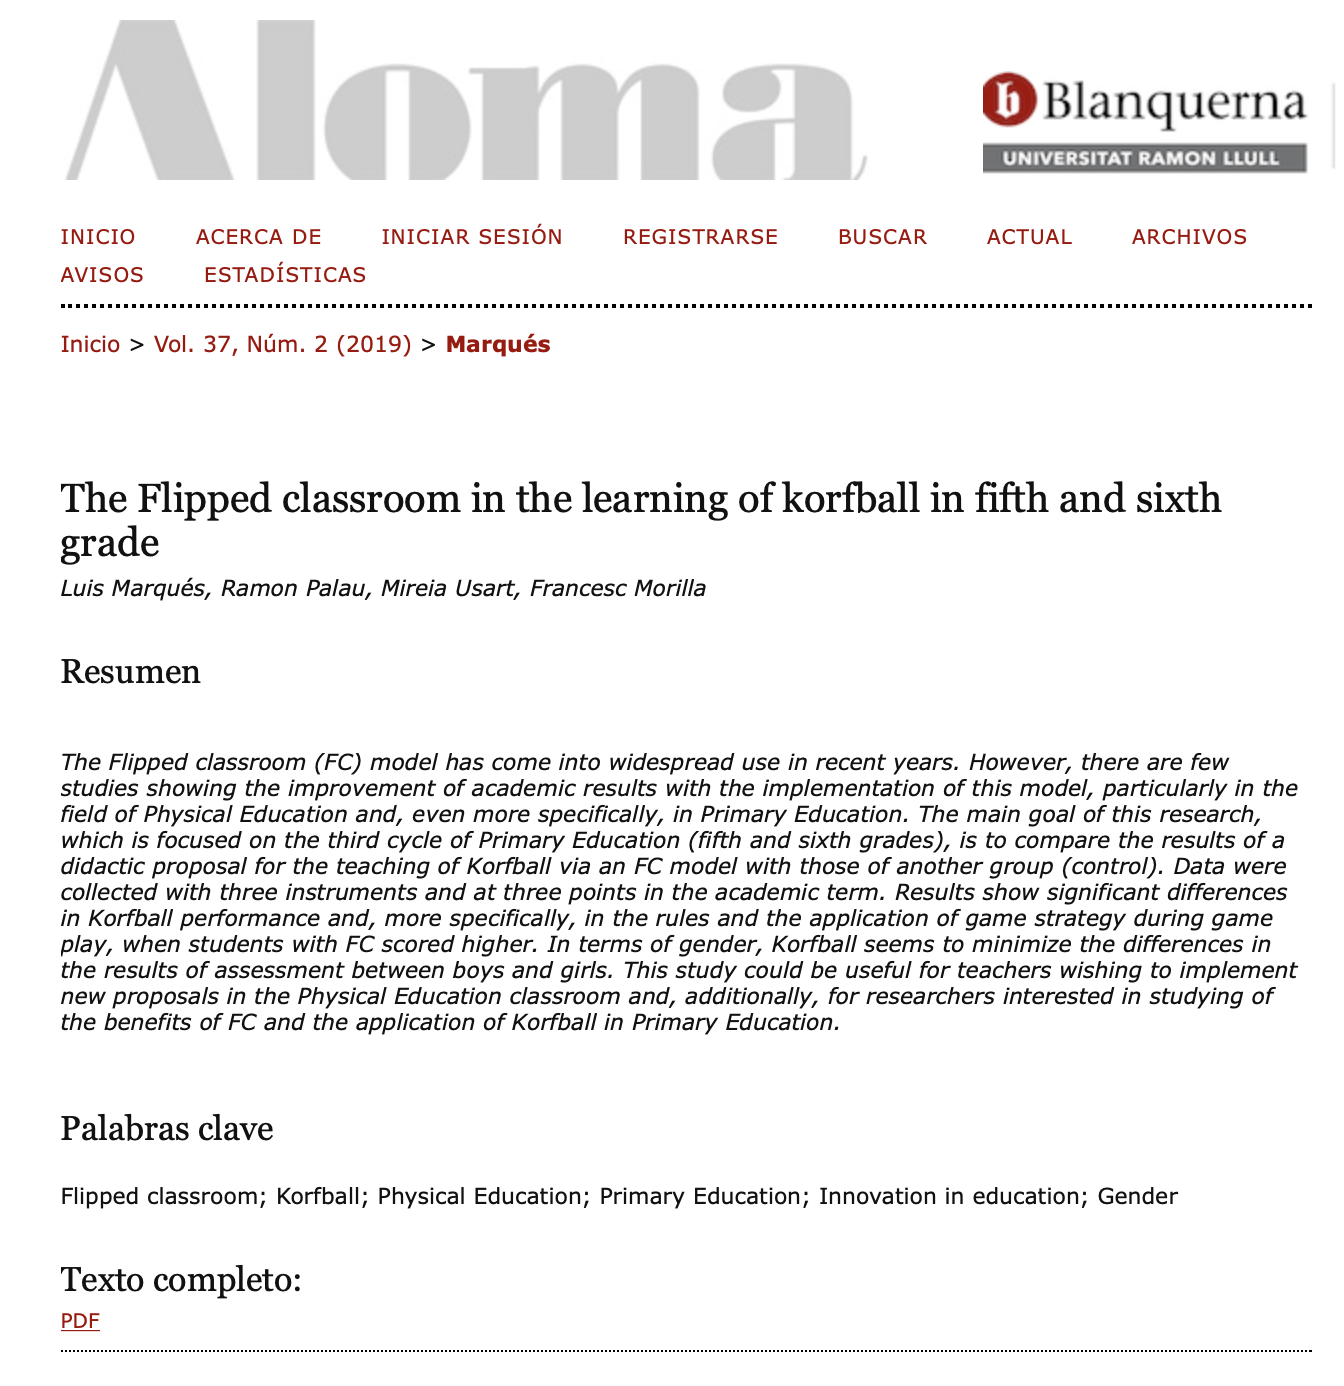 The Flipped classroom in the learning of korfball in fifth and sixth grade